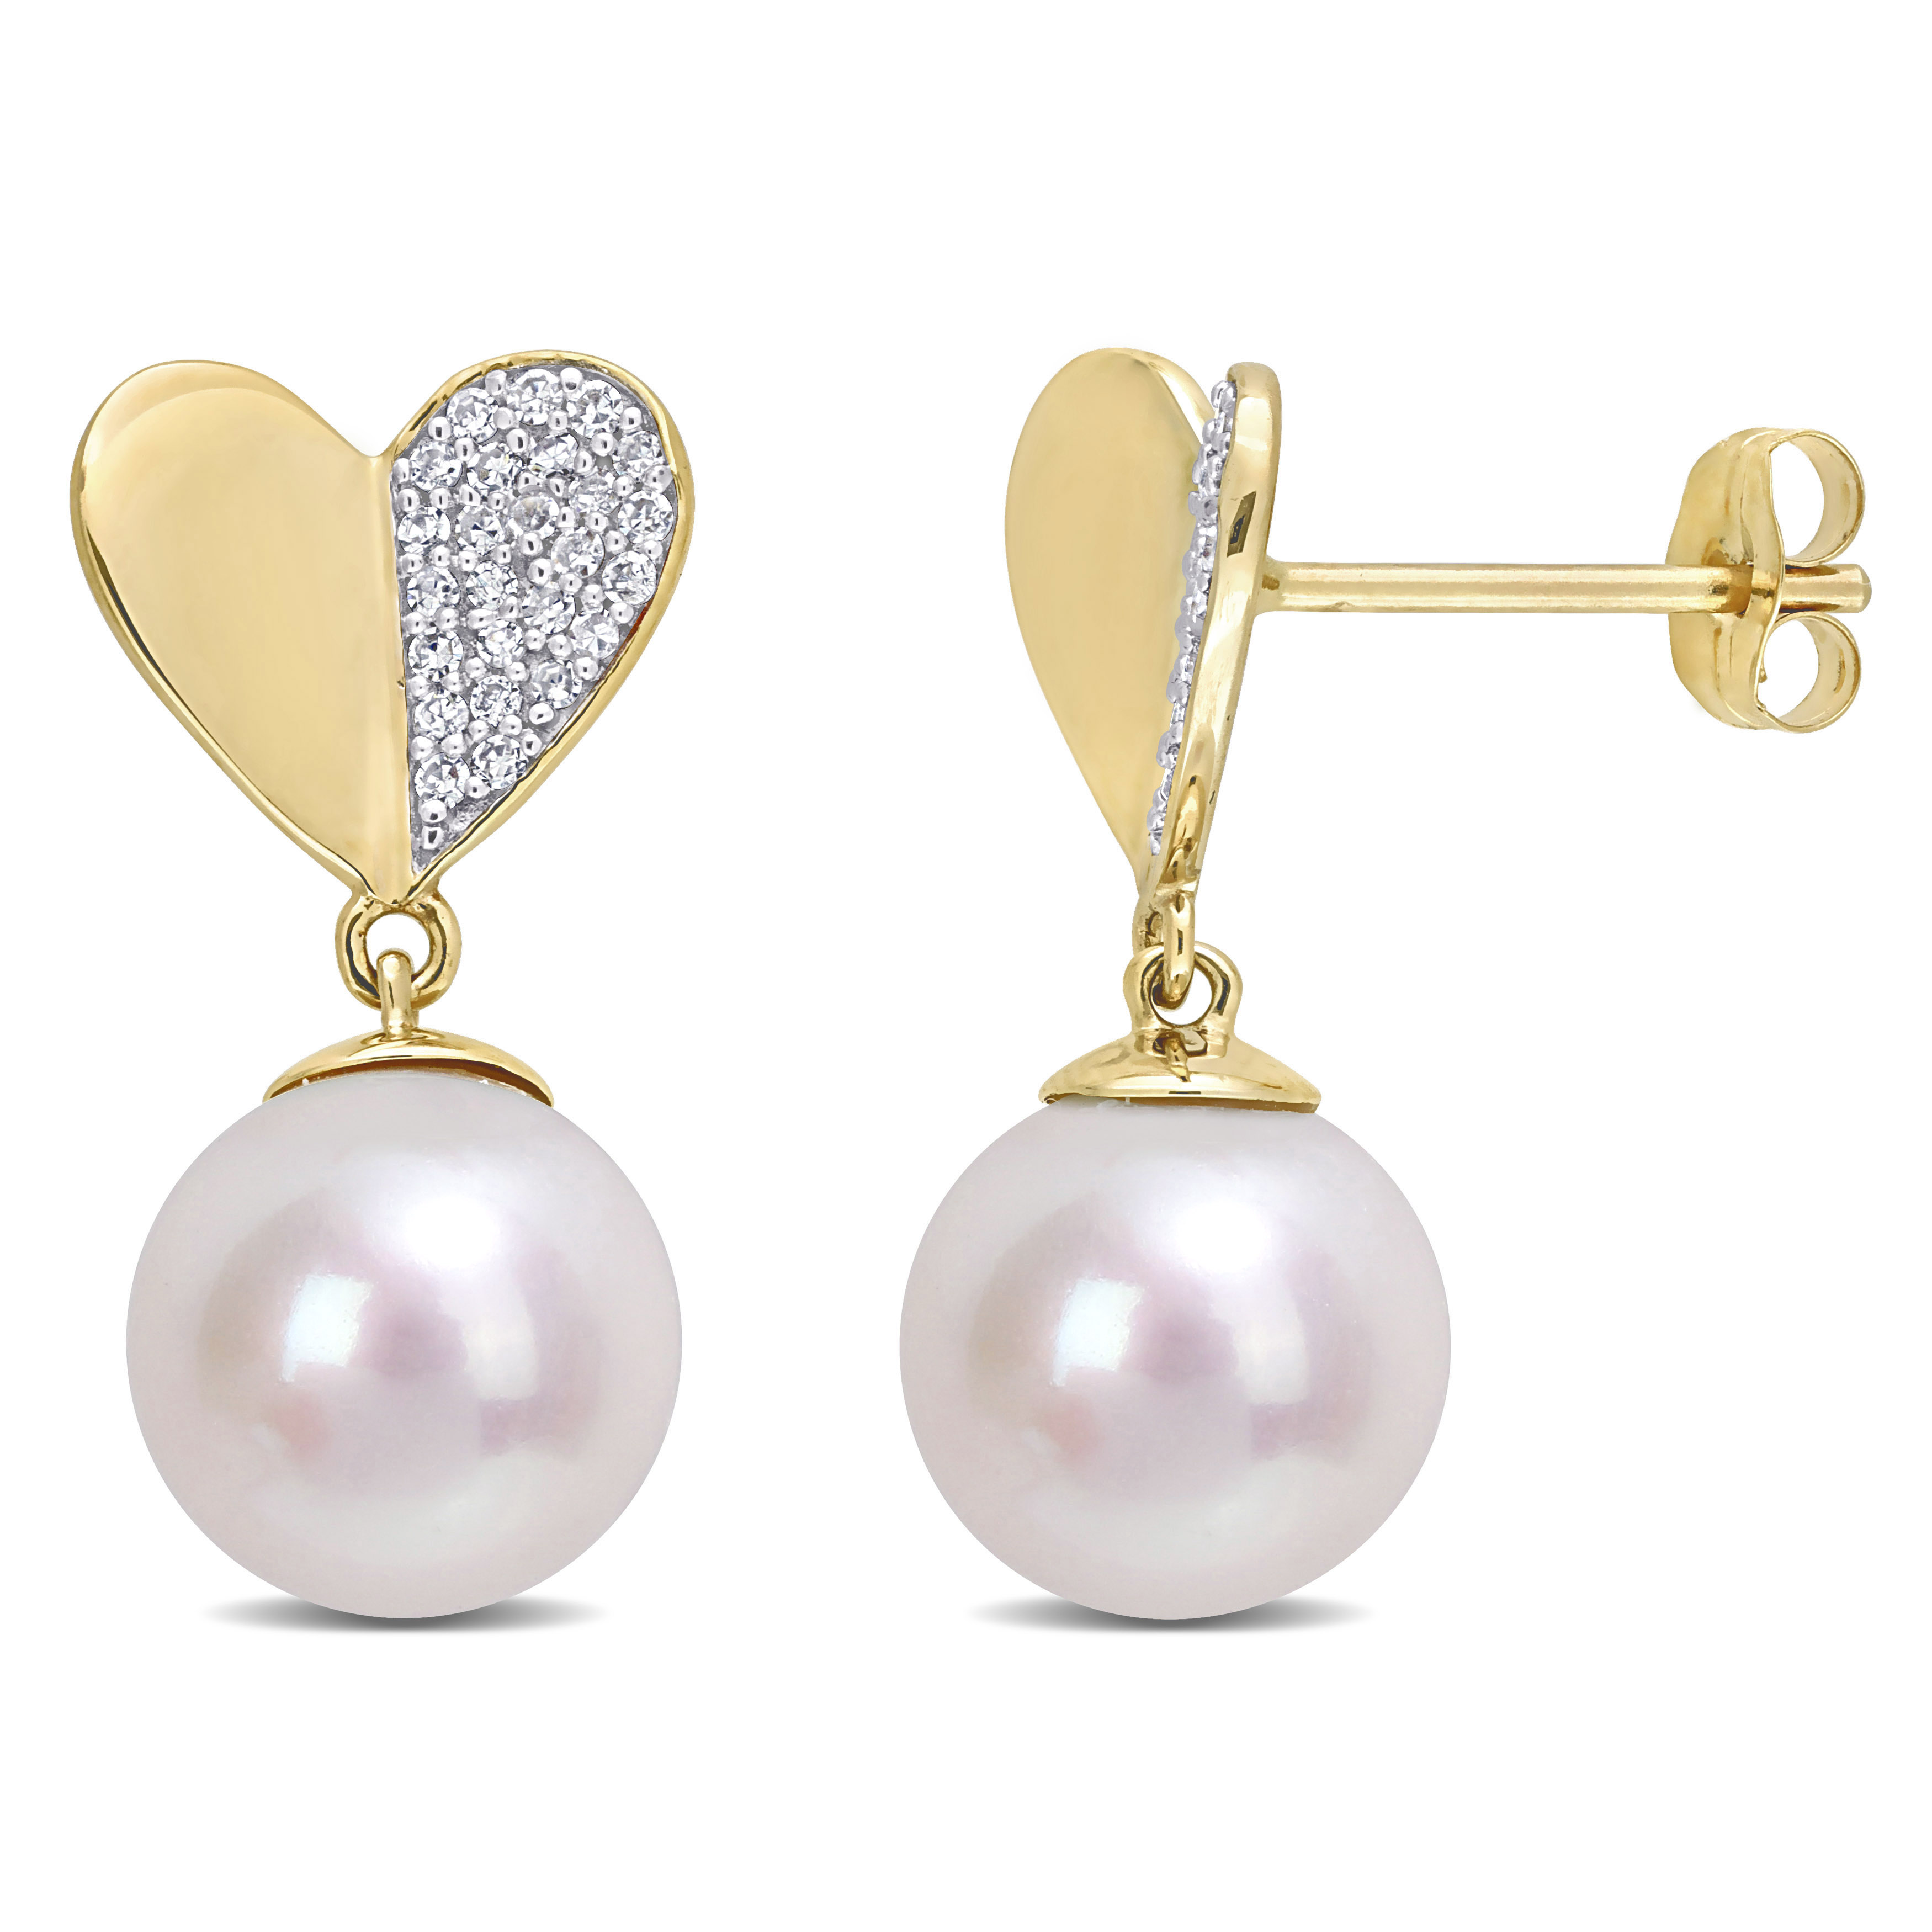 8.5-9 MM Cultured Freshwater Pearl and 1/6 CT TW Diamond Heart Drop Earrings in 14k Yellow Gold